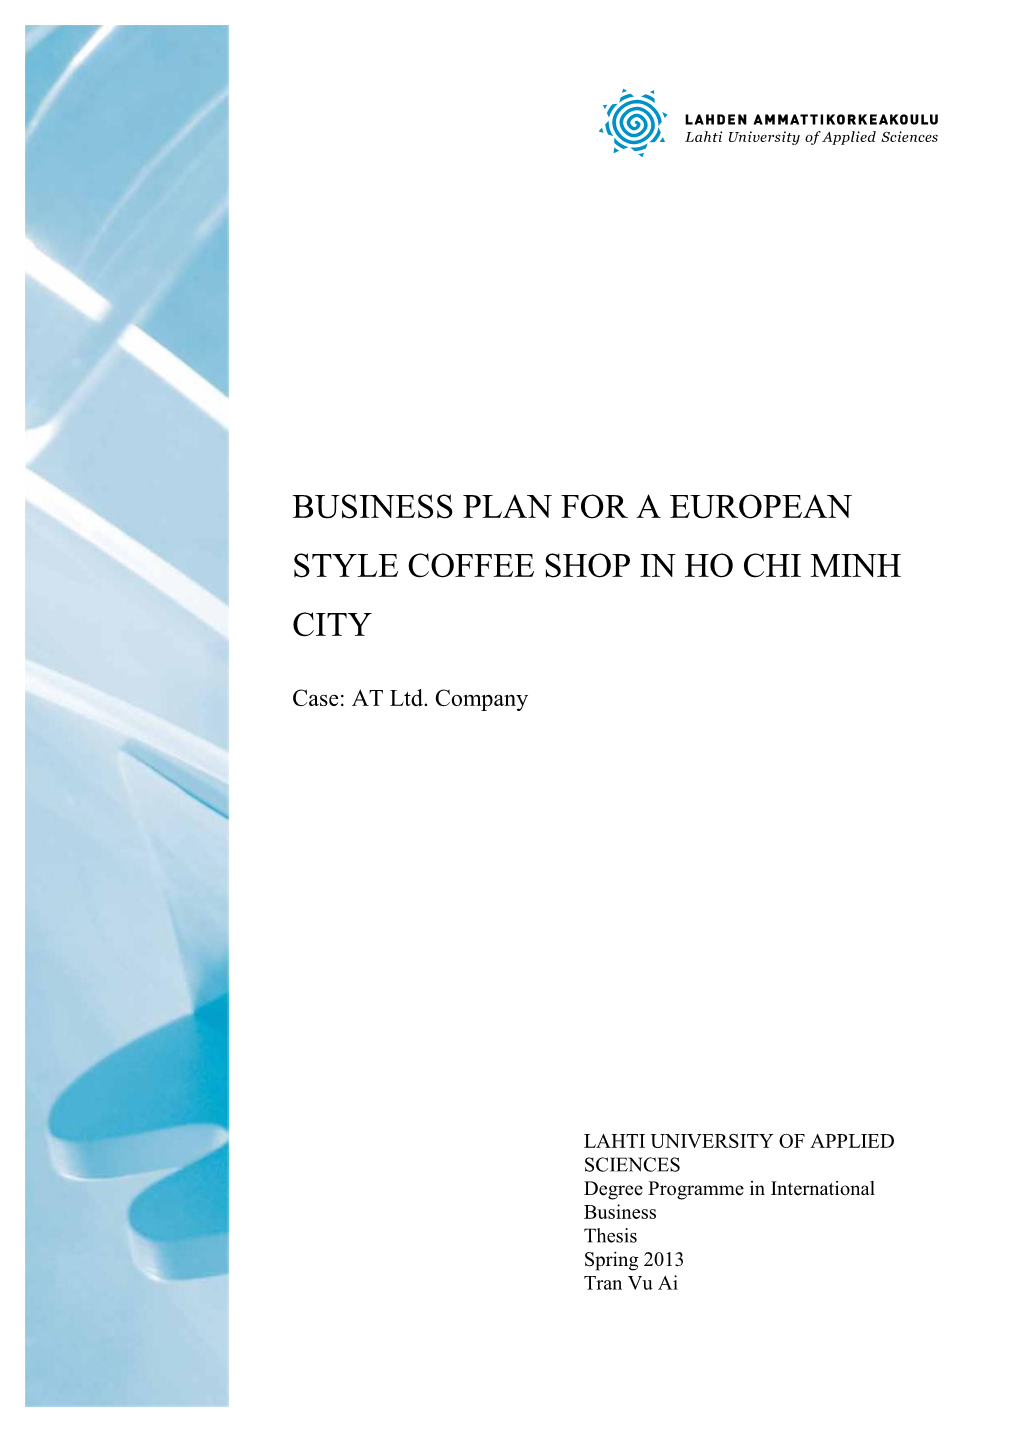 Business Plan for a European Style Coffee Shop in Ho Chi Minh City